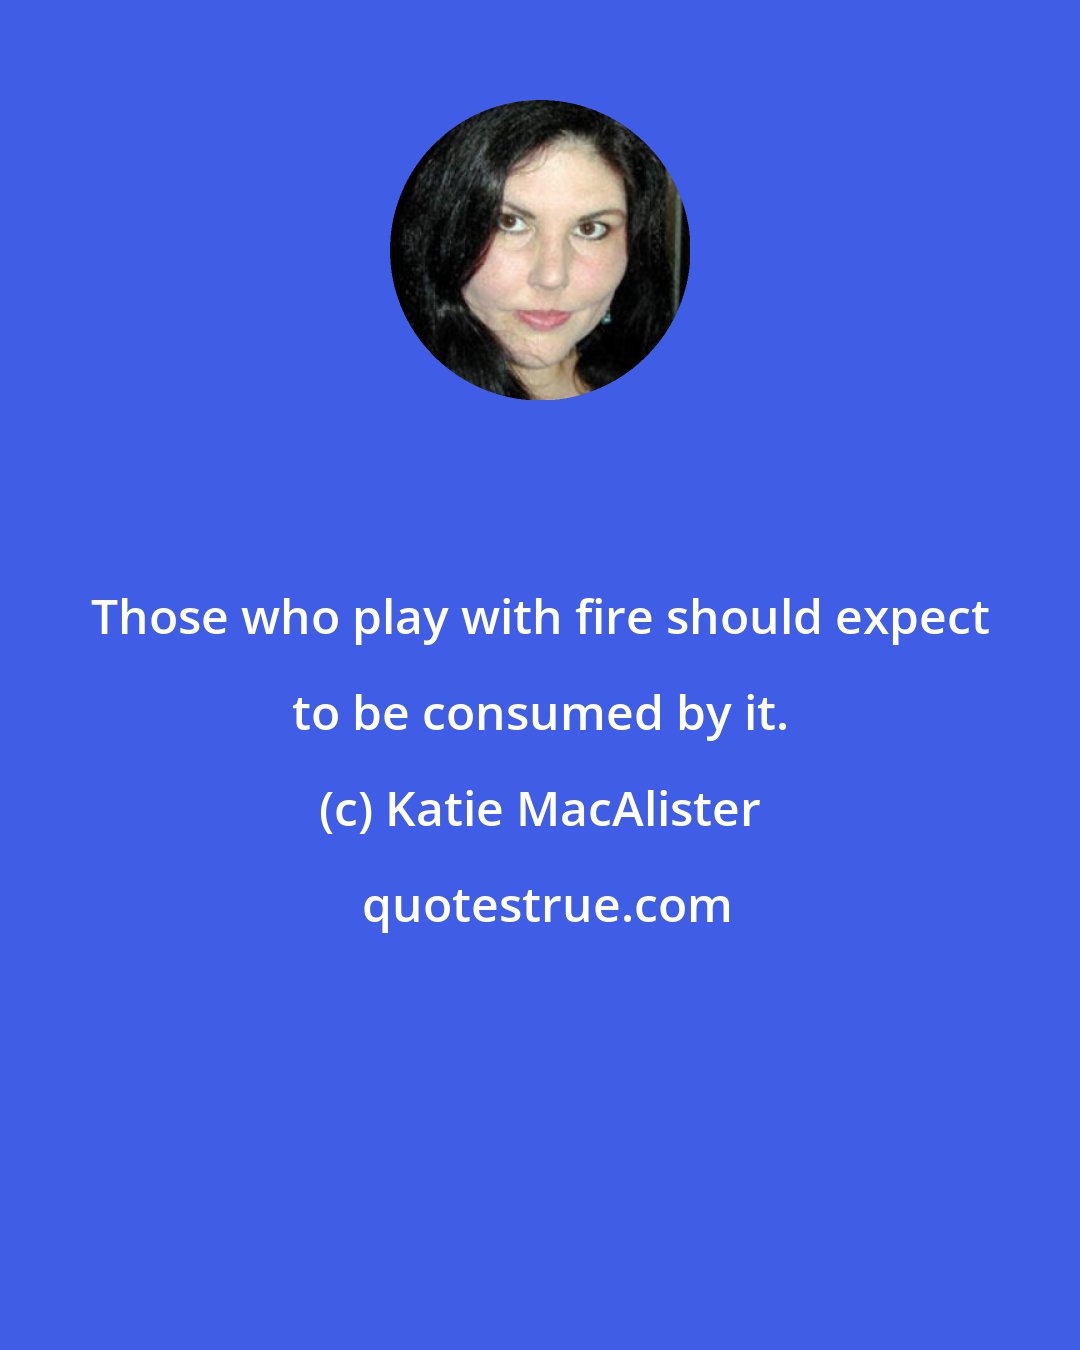 Katie MacAlister: Those who play with fire should expect to be consumed by it.